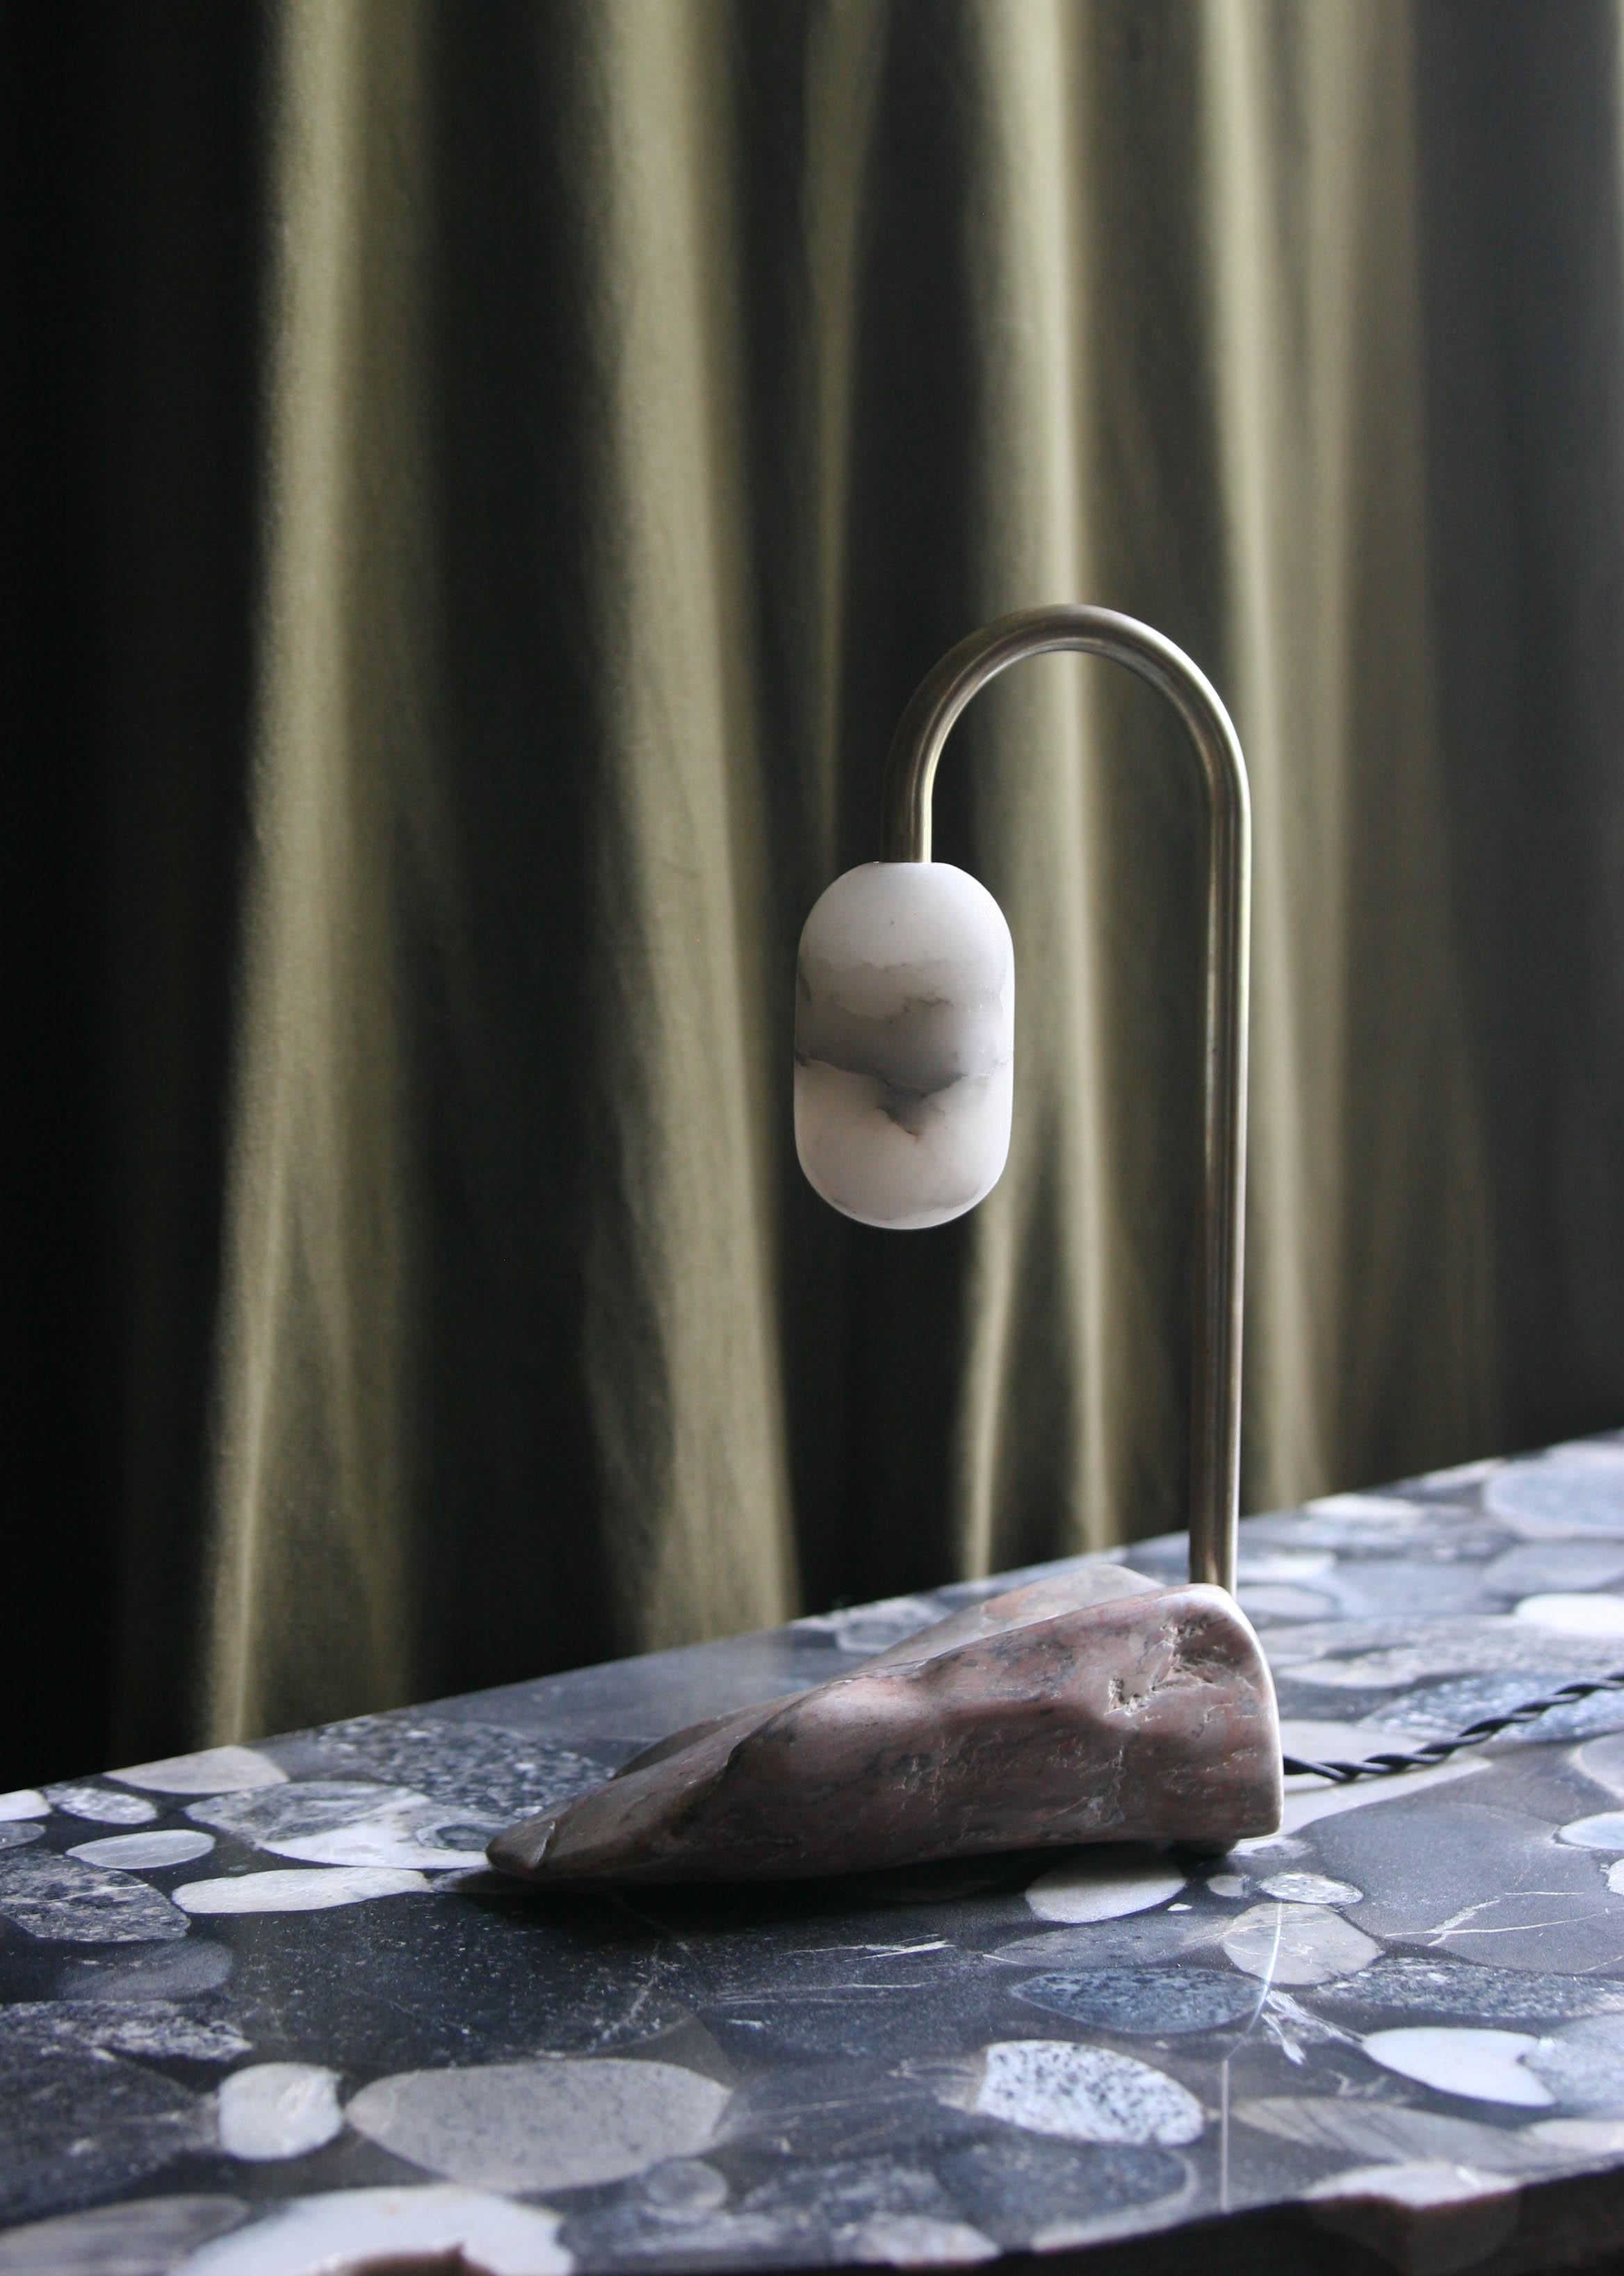 CL-oo Cane lamp by Krzywda.
Dimensions: 19 L x 16 D x 30 H cm.
Materials: Alabaster, brass, marble.
Each base is sculpted by hand and varies from piece to piece in shape, color and weight.

All lamps could be wired for each